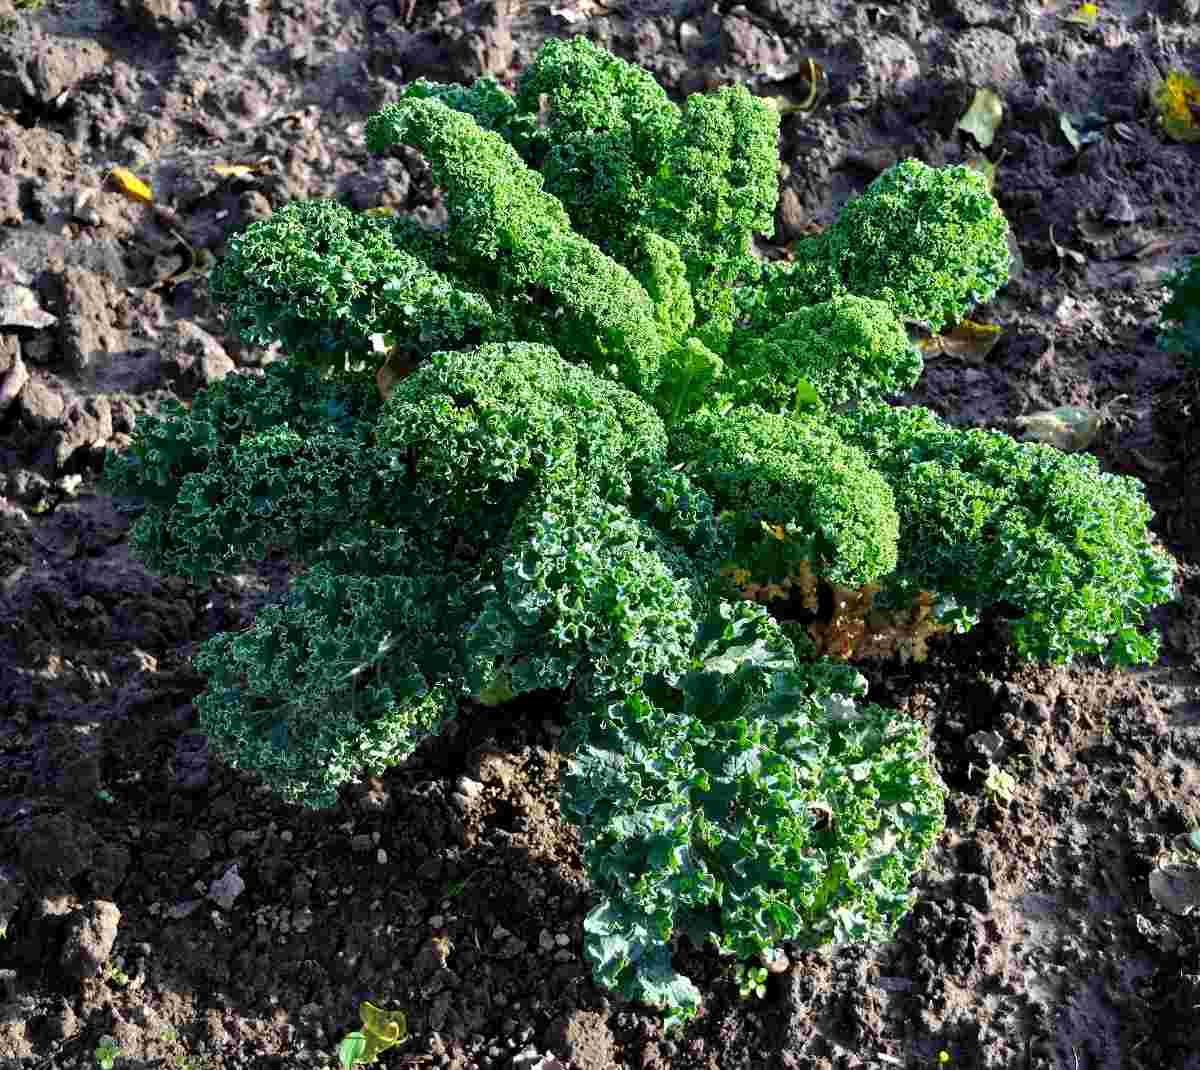 Some questions about growing Kale.